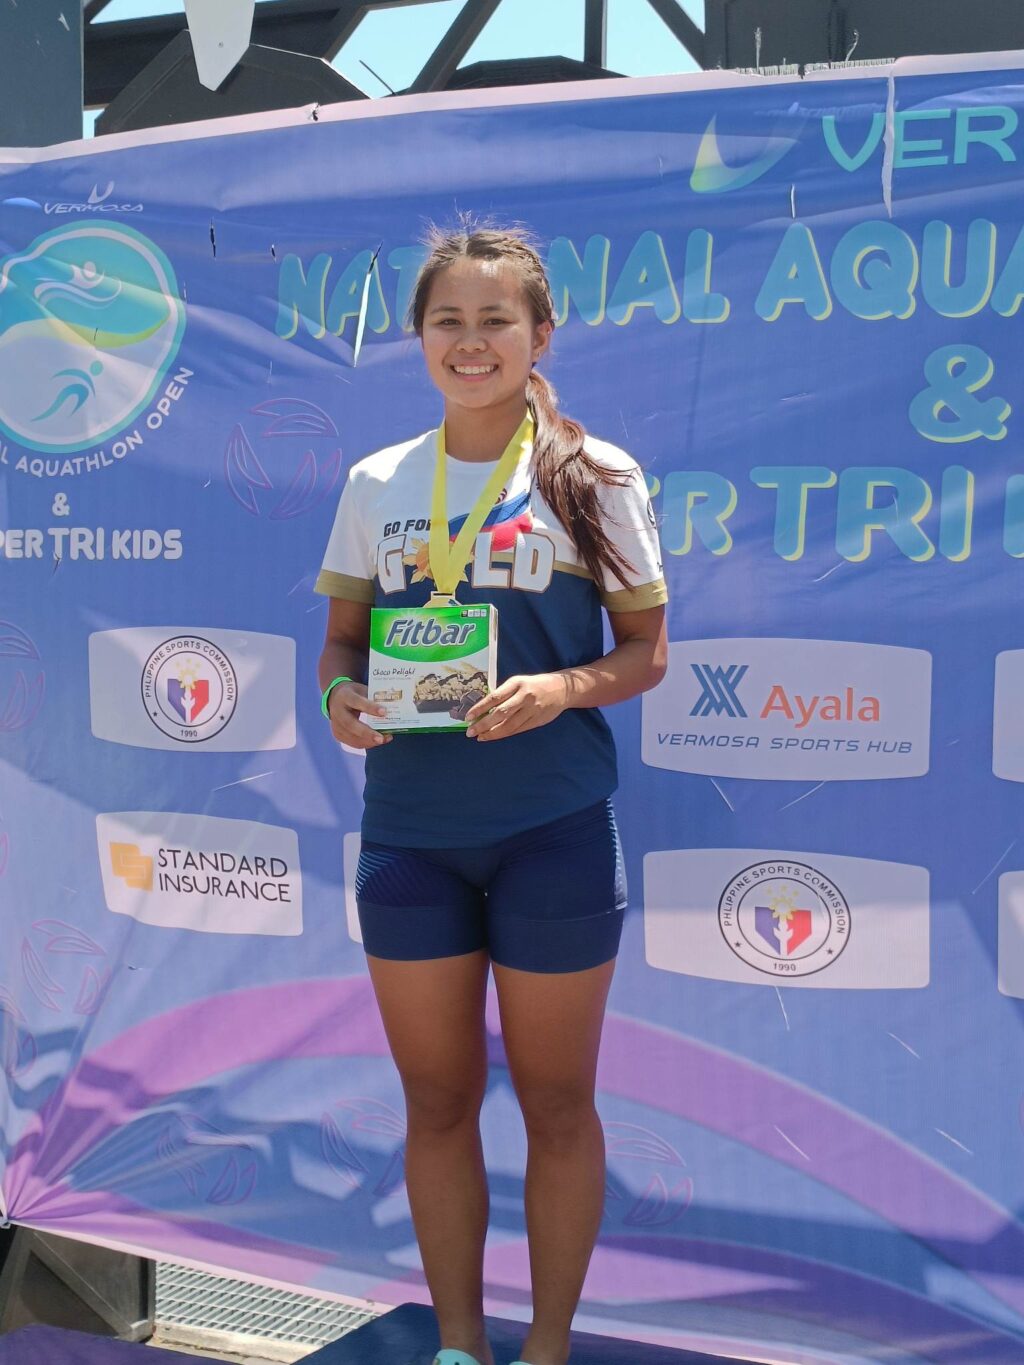 Erediano, Cebuana duathlete, tops women’s junior elite category of Nat’l Aqualthlon Open. Moira Frances Erediano during the awarding ceremony of the National Aquathlon Open and Super TriKids in Cavite. | Contributed Photo